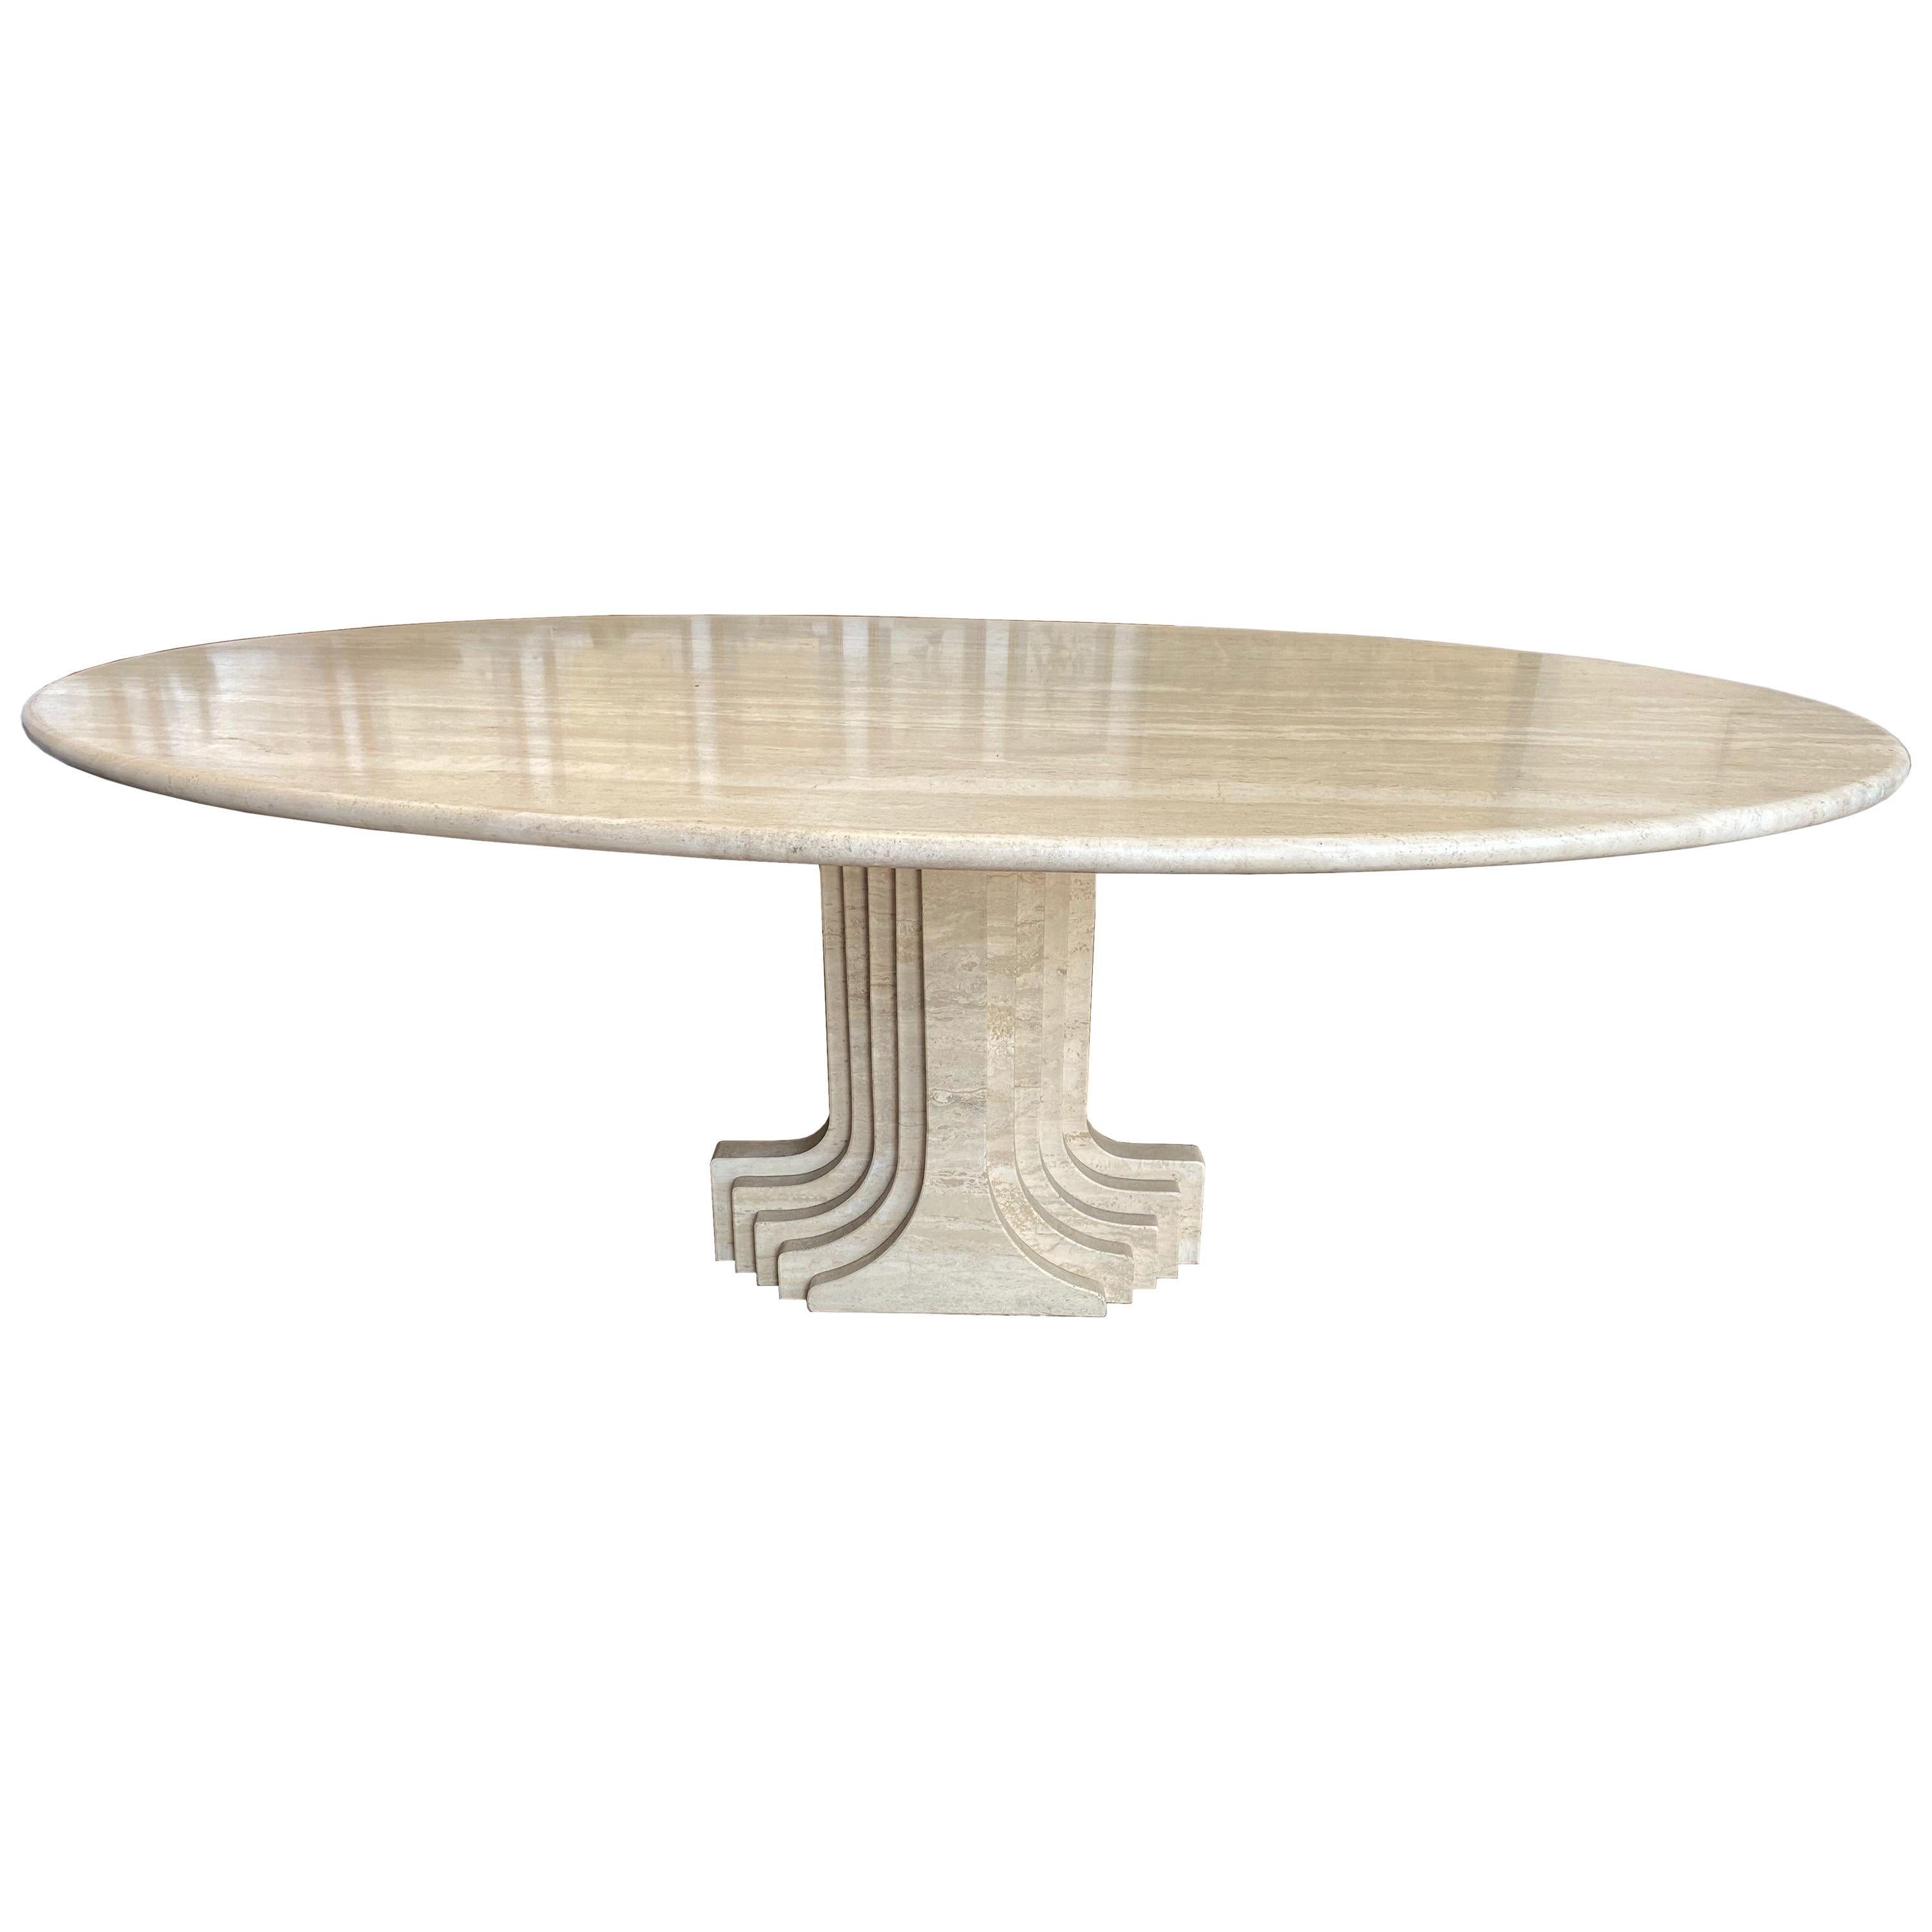 Large Travertine Pedestal "Argo" Dining Table by Carlo Scarpa for Simon/Gavina For Sale